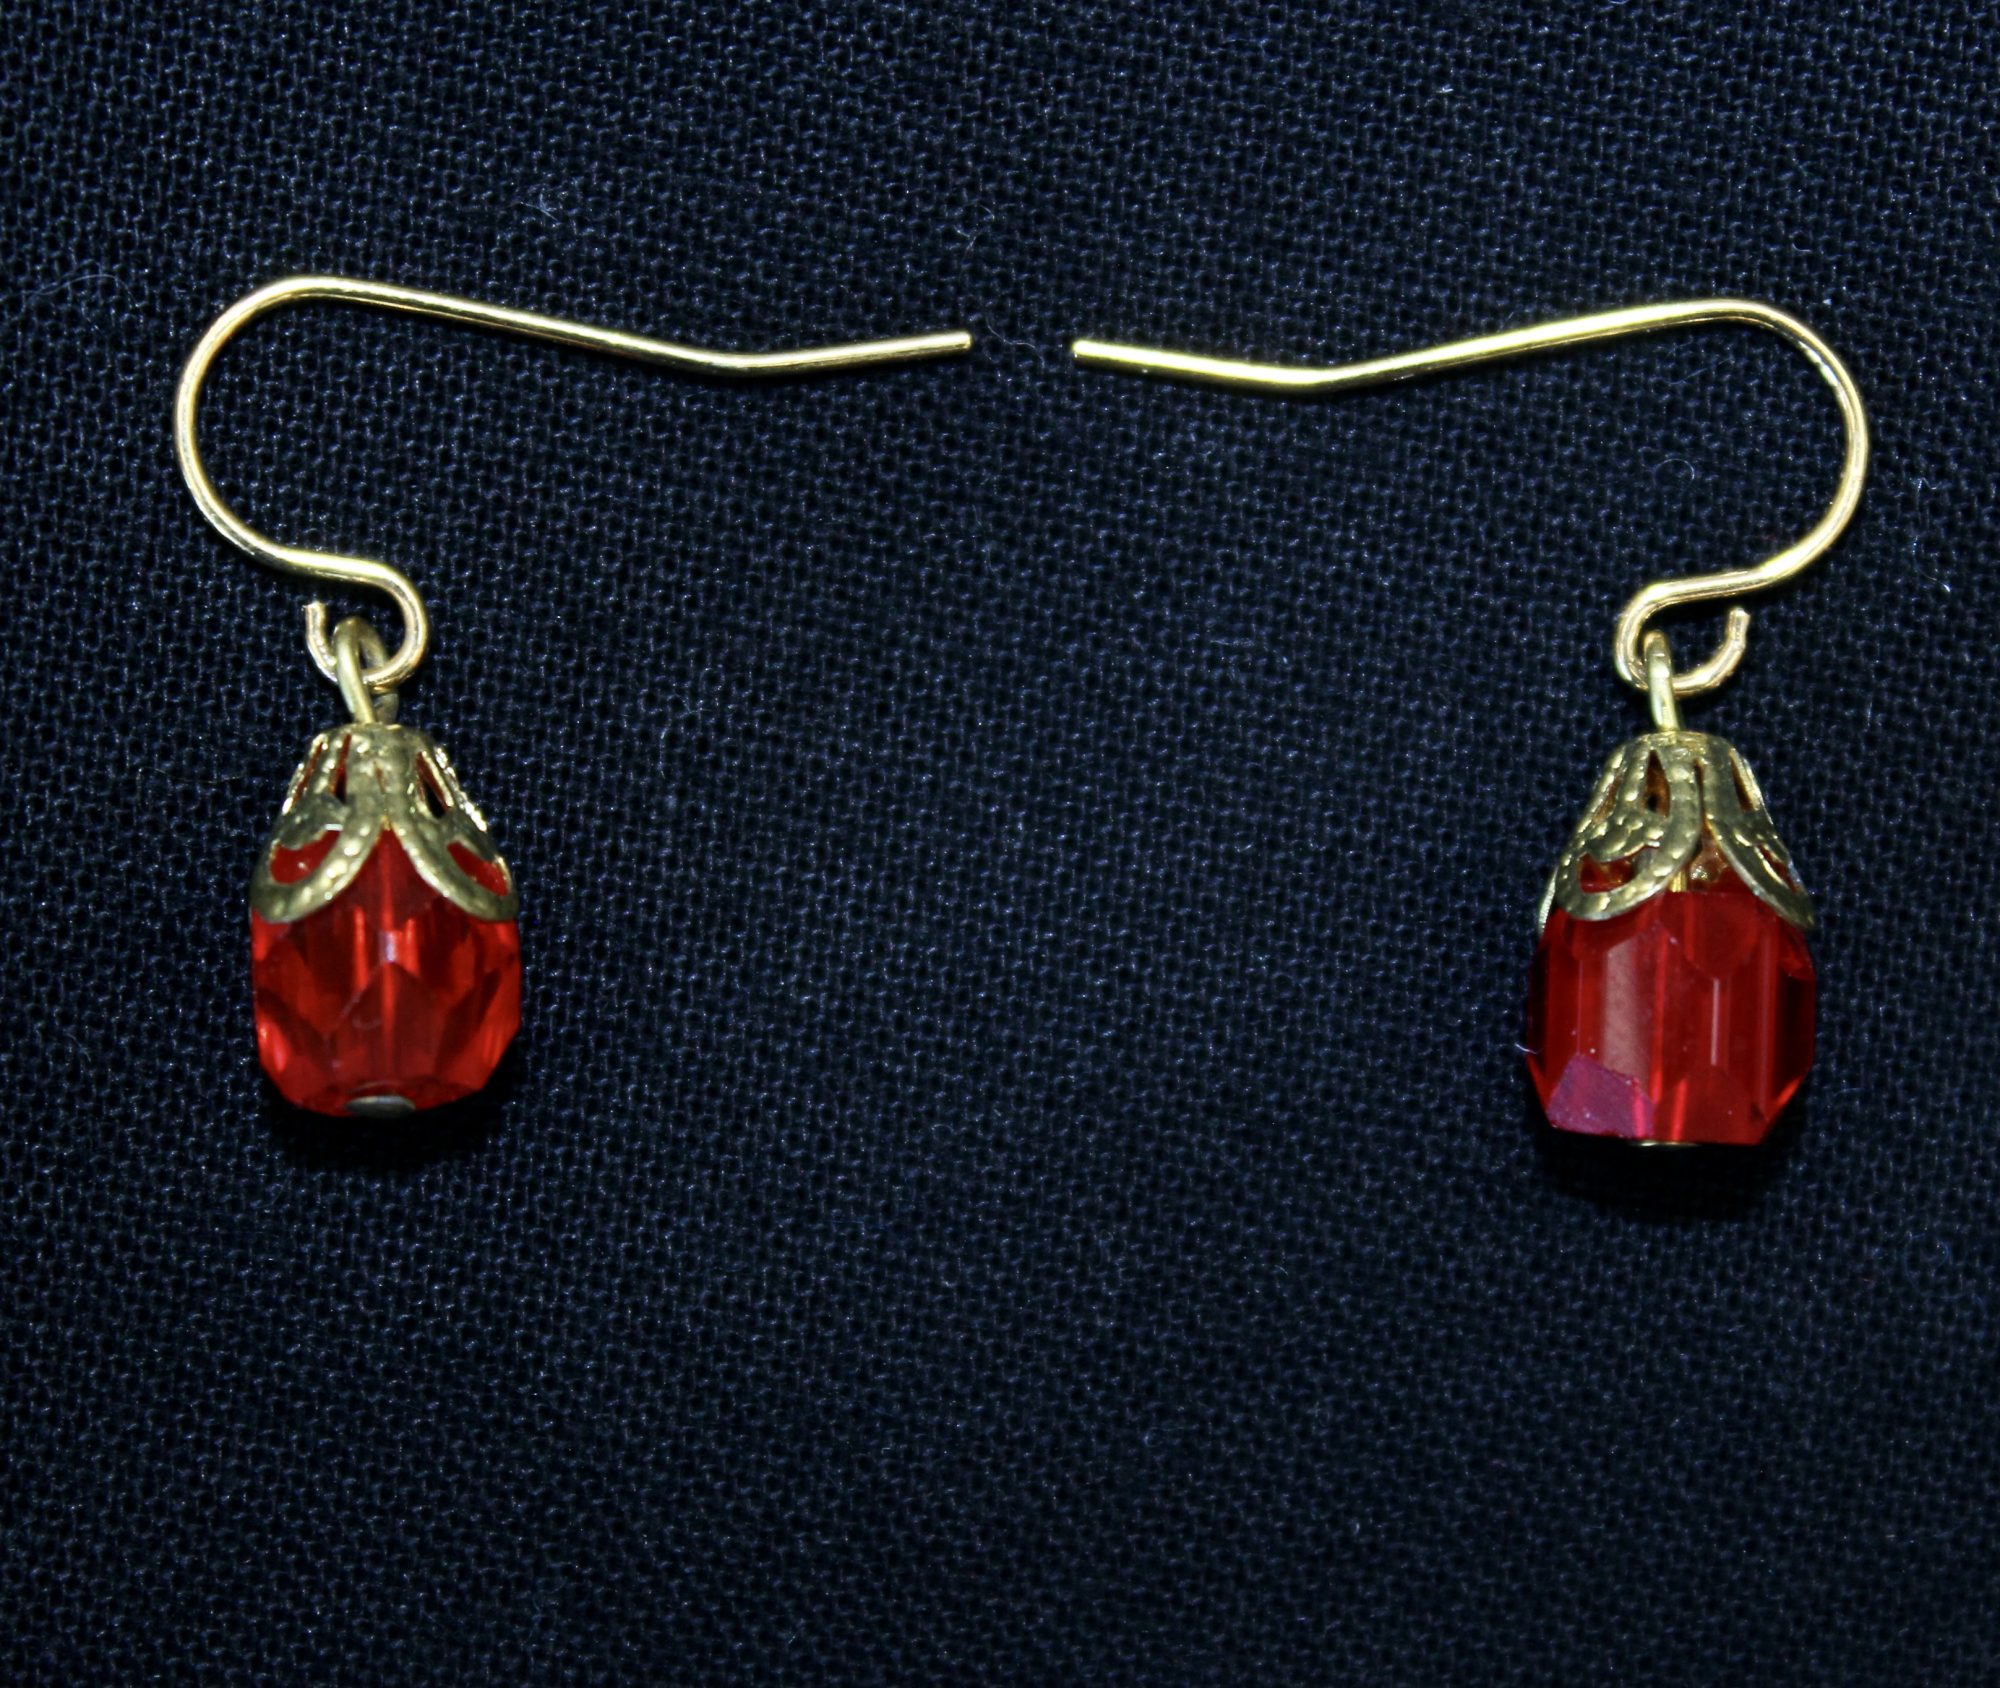 Victorian Repro Red Faceted Glass Drop Earrings - Civil War Sutler